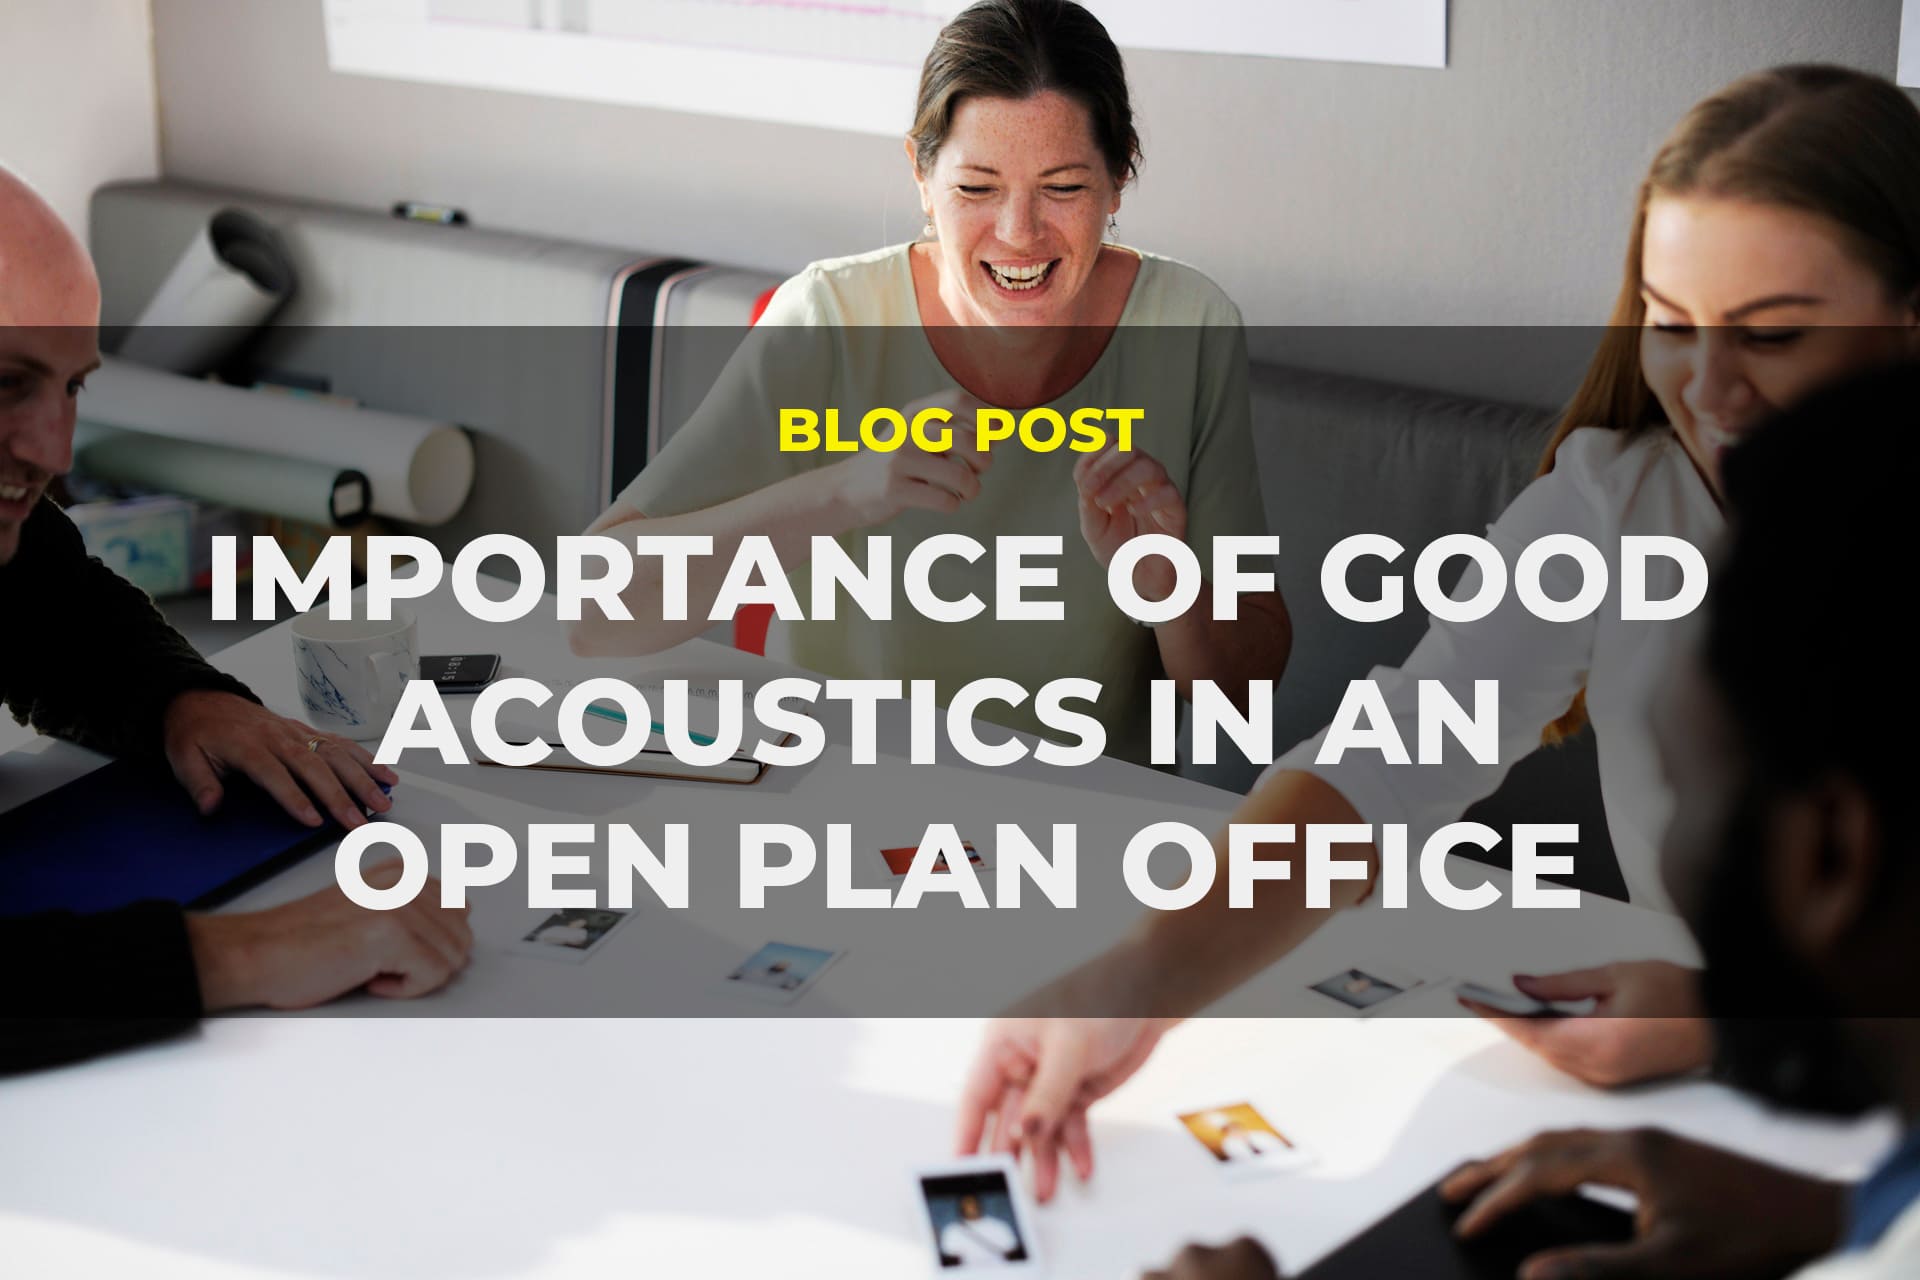 Importance of Good Acoustics in an Open Plan Office